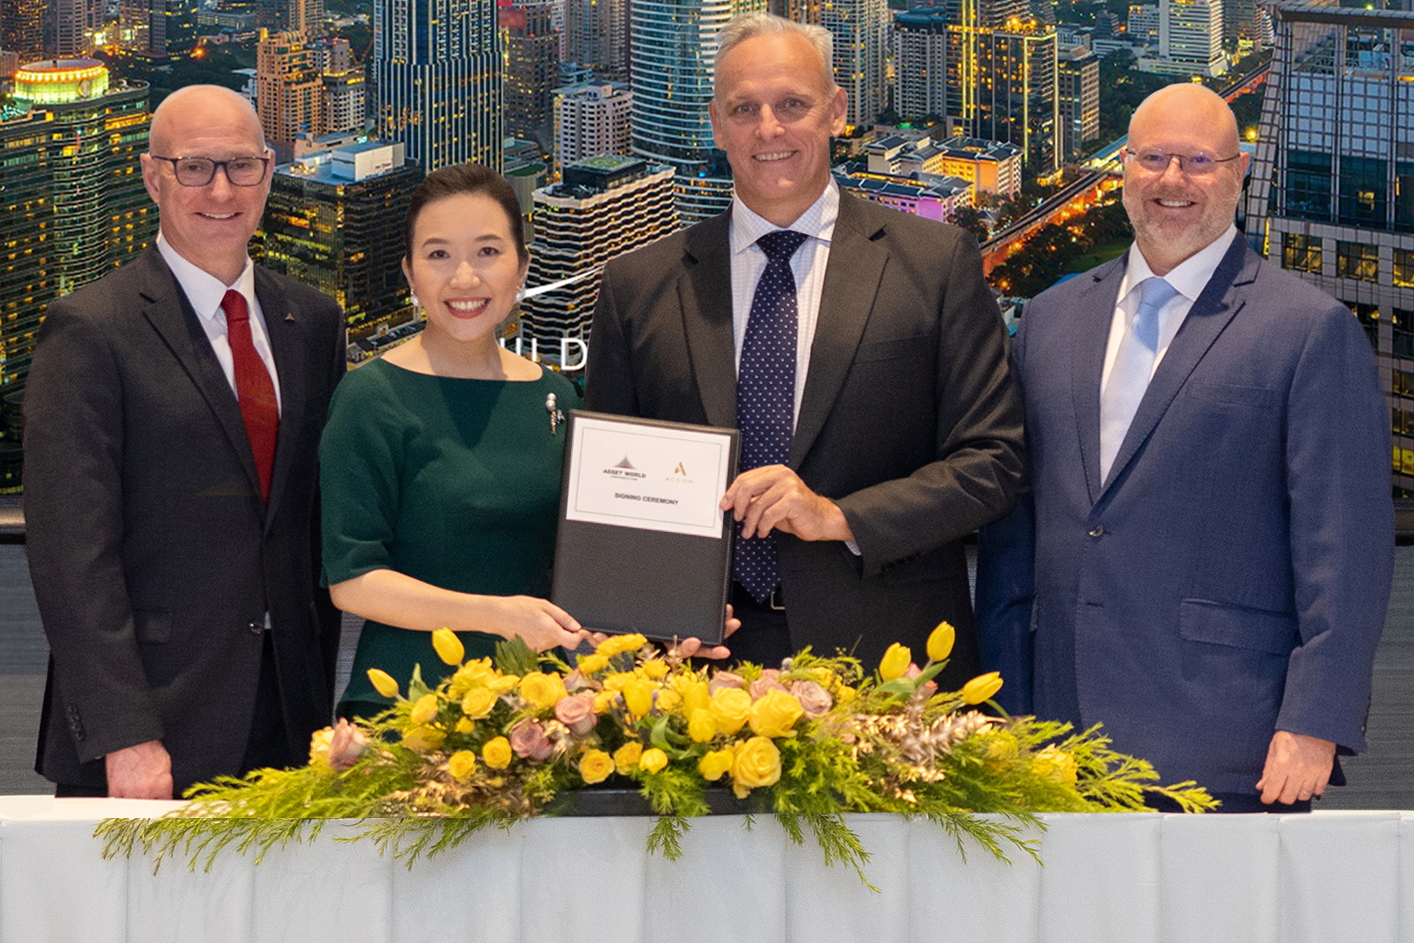 From left: Matthew John Knights, Chief Hospitality Group Officer, AWC; Wallapa Traisorat, CEO / President, AWC; Garth Simmons, CEO, Accor Southeast Asia, Japan & South Korea; and Andrew Langdon, SVP Development, Accor Southeast Asia, Japan & South Korea. Click to enlarge.